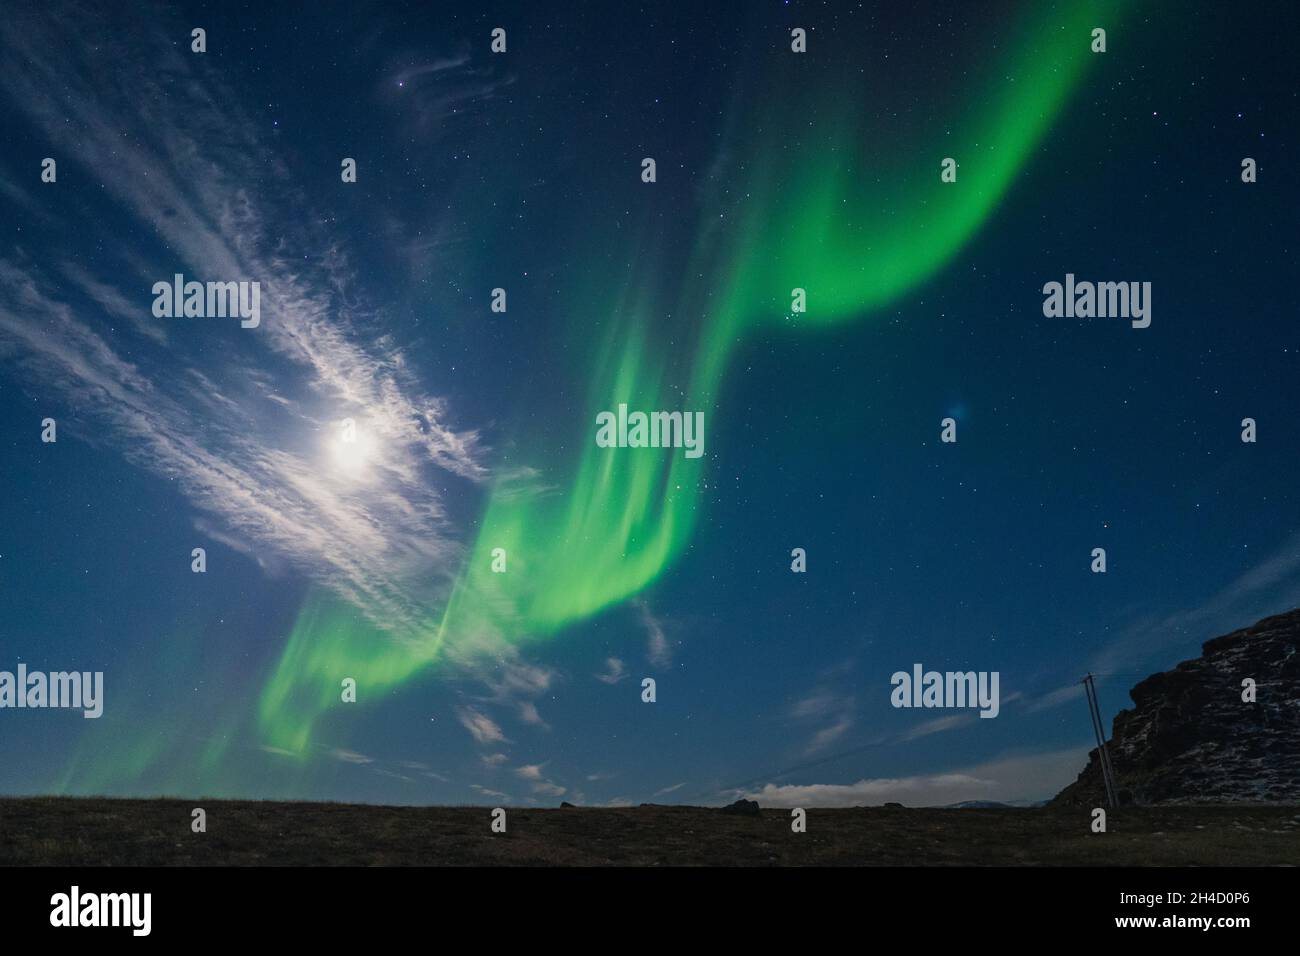 Northern lights known as aurora borealis over the arctic landscape in Norway Stock Photo